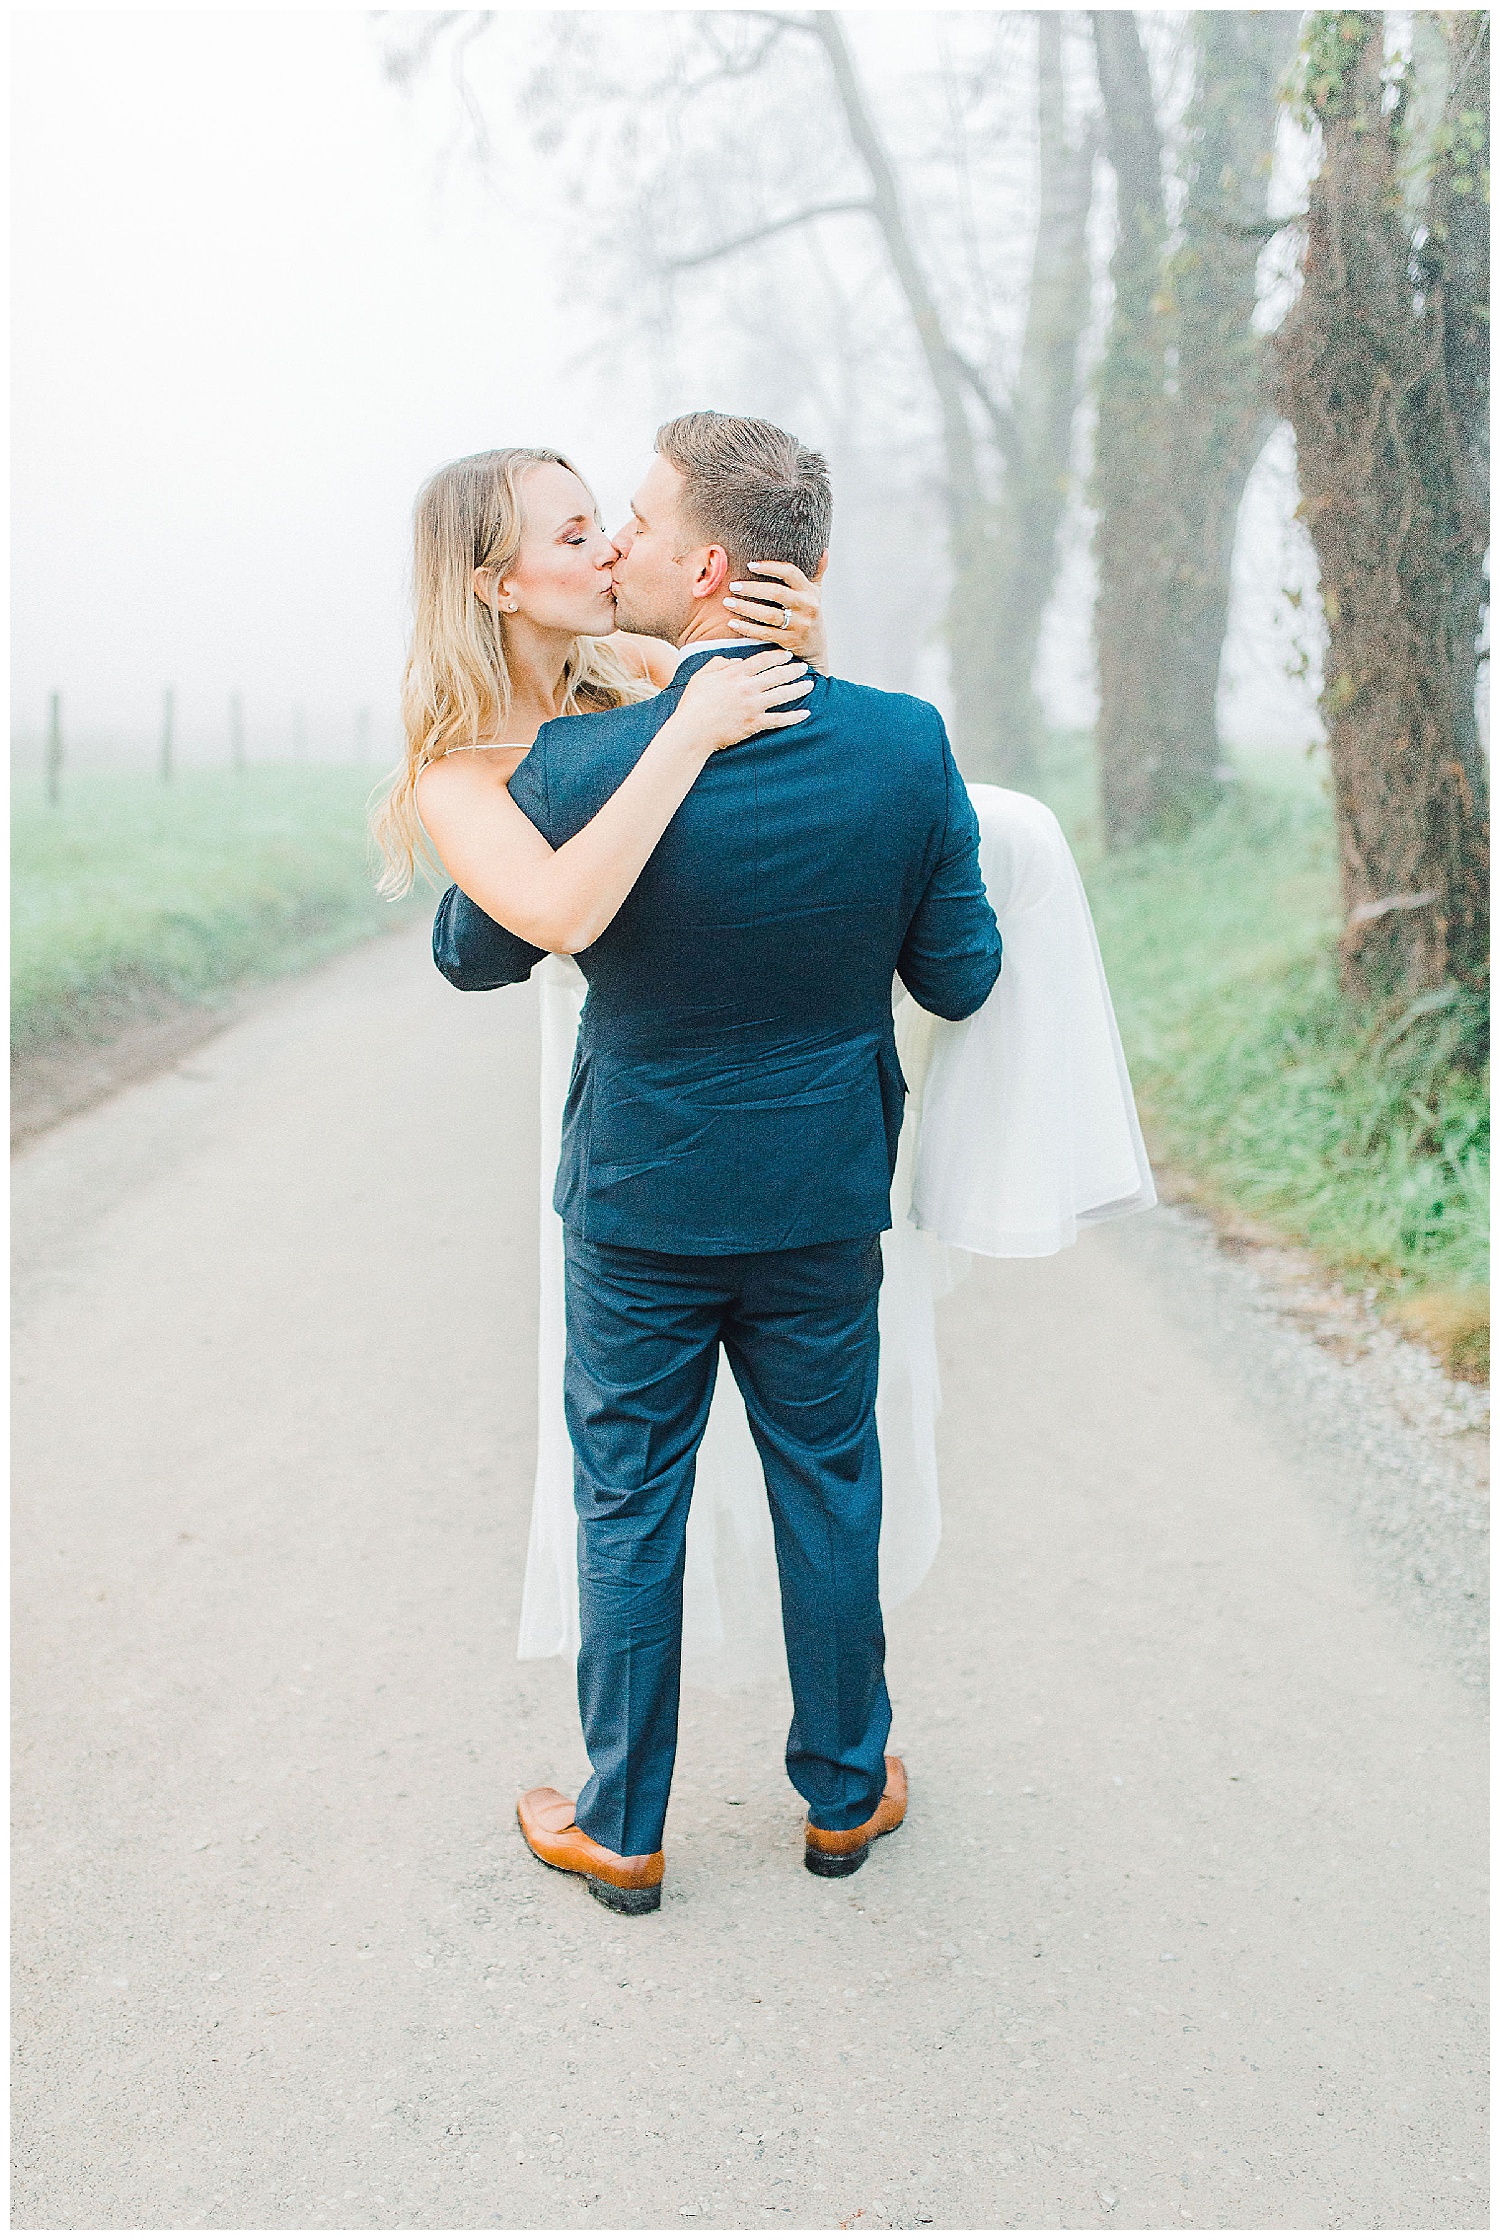 Emma Rose Company recently got to travel all the way to Nashville to photograph the most beautiful post-wedding bride and groom portraits in the Great Smoky Mountains with a gorgeous couple! Nashville wedding inspiration at it's finest._0010.jpg